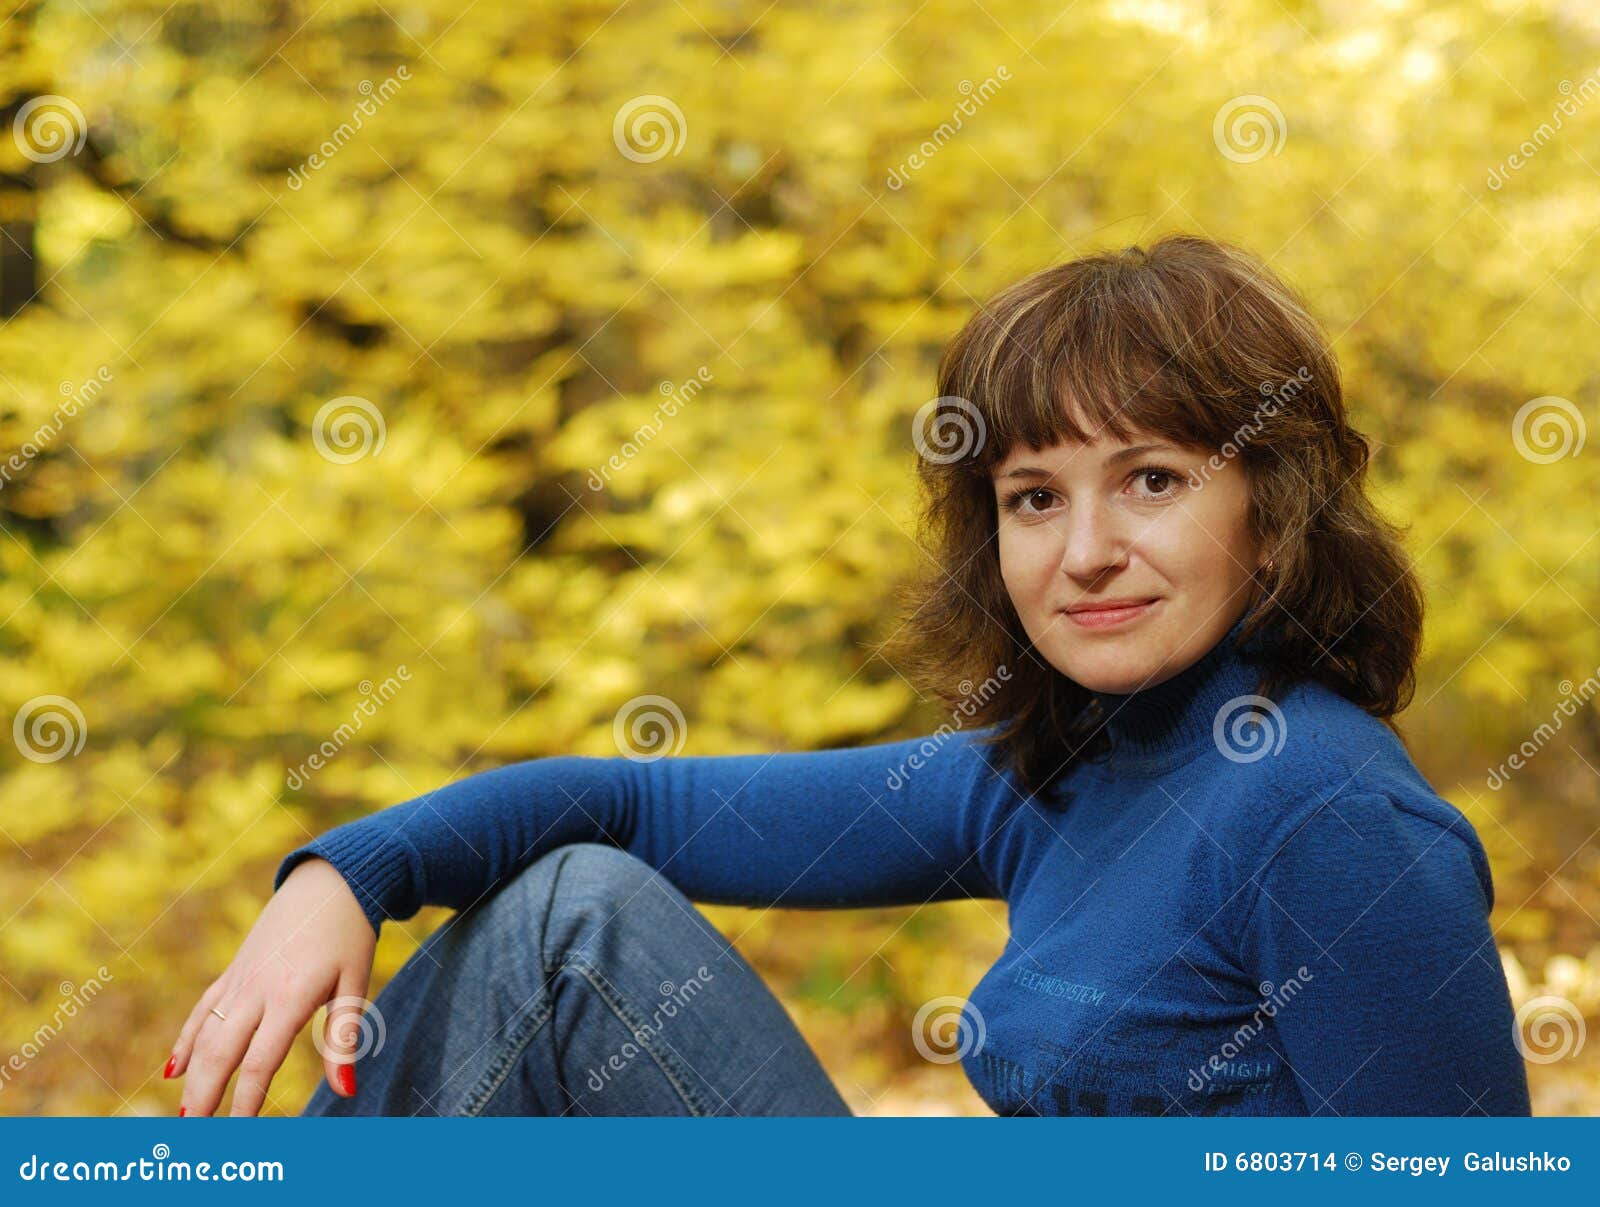 Girl and autumn forest stock photo. Image of face, love - 6803714